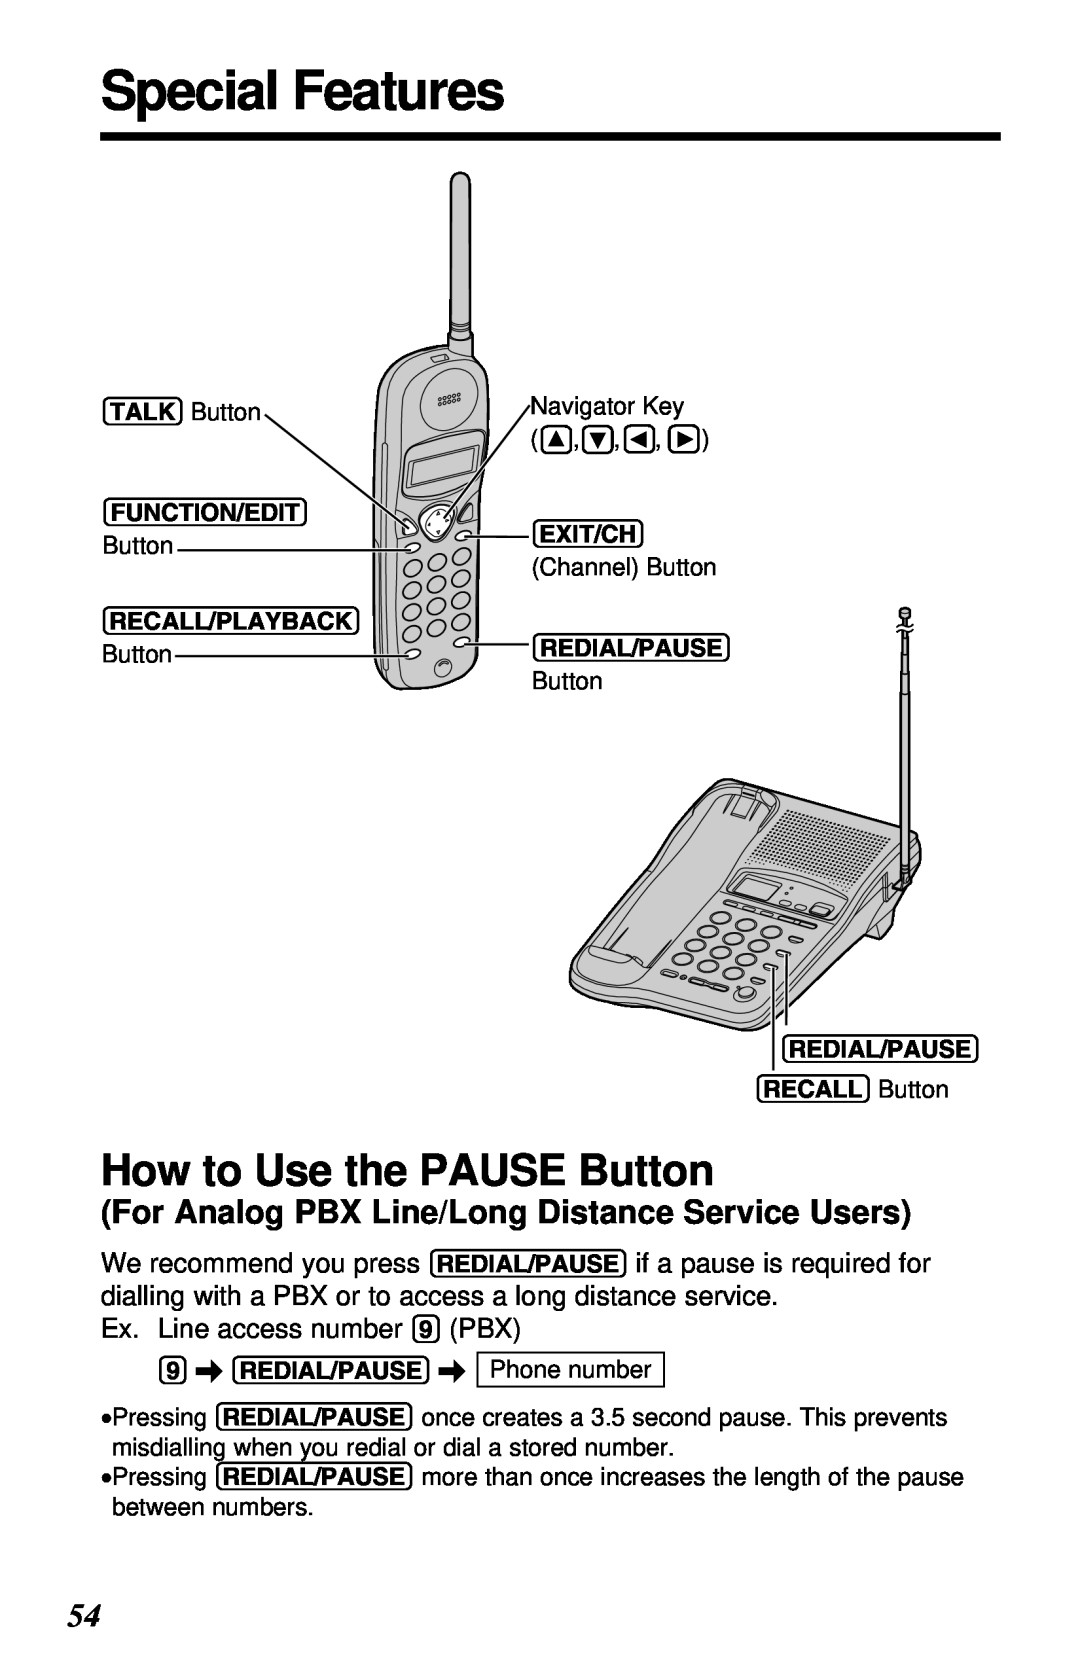 Panasonic KX-TC1230ALW, KX-TC1230NZW, KX-TC1230NZW, KX-TC1230ALW Special Features, How to Use the PAUSE Button 